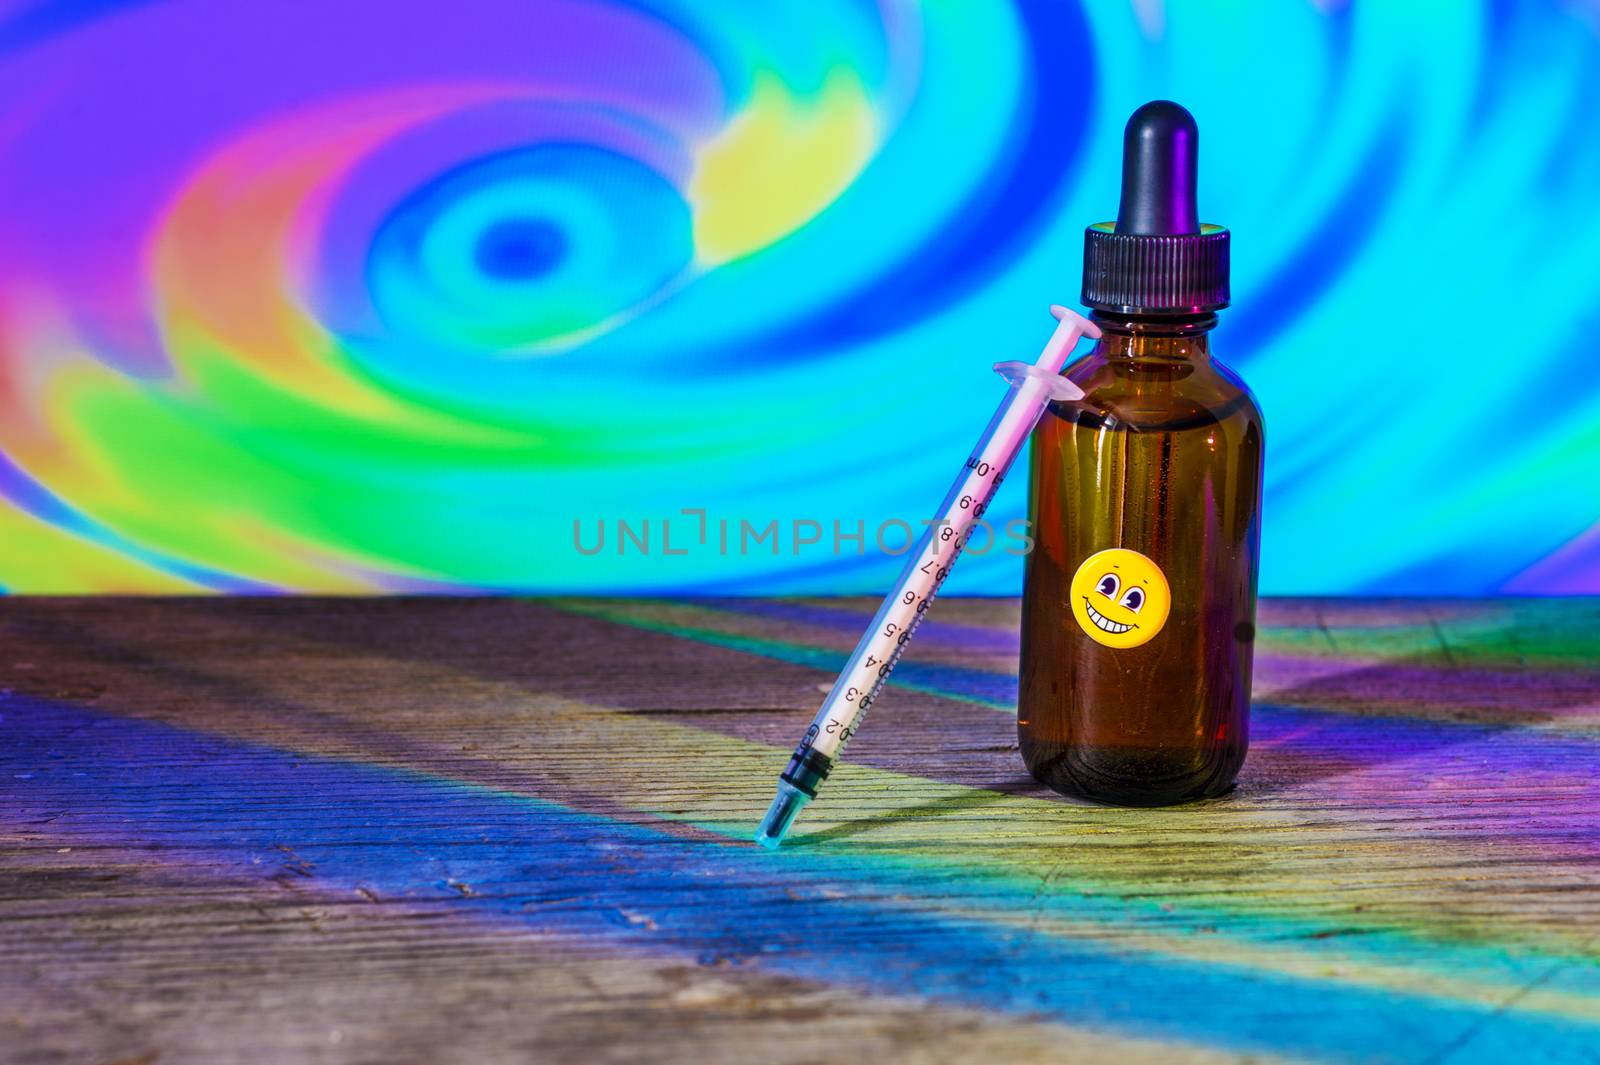 Conceptual image of a bottle of diluted LSD used for microdosing